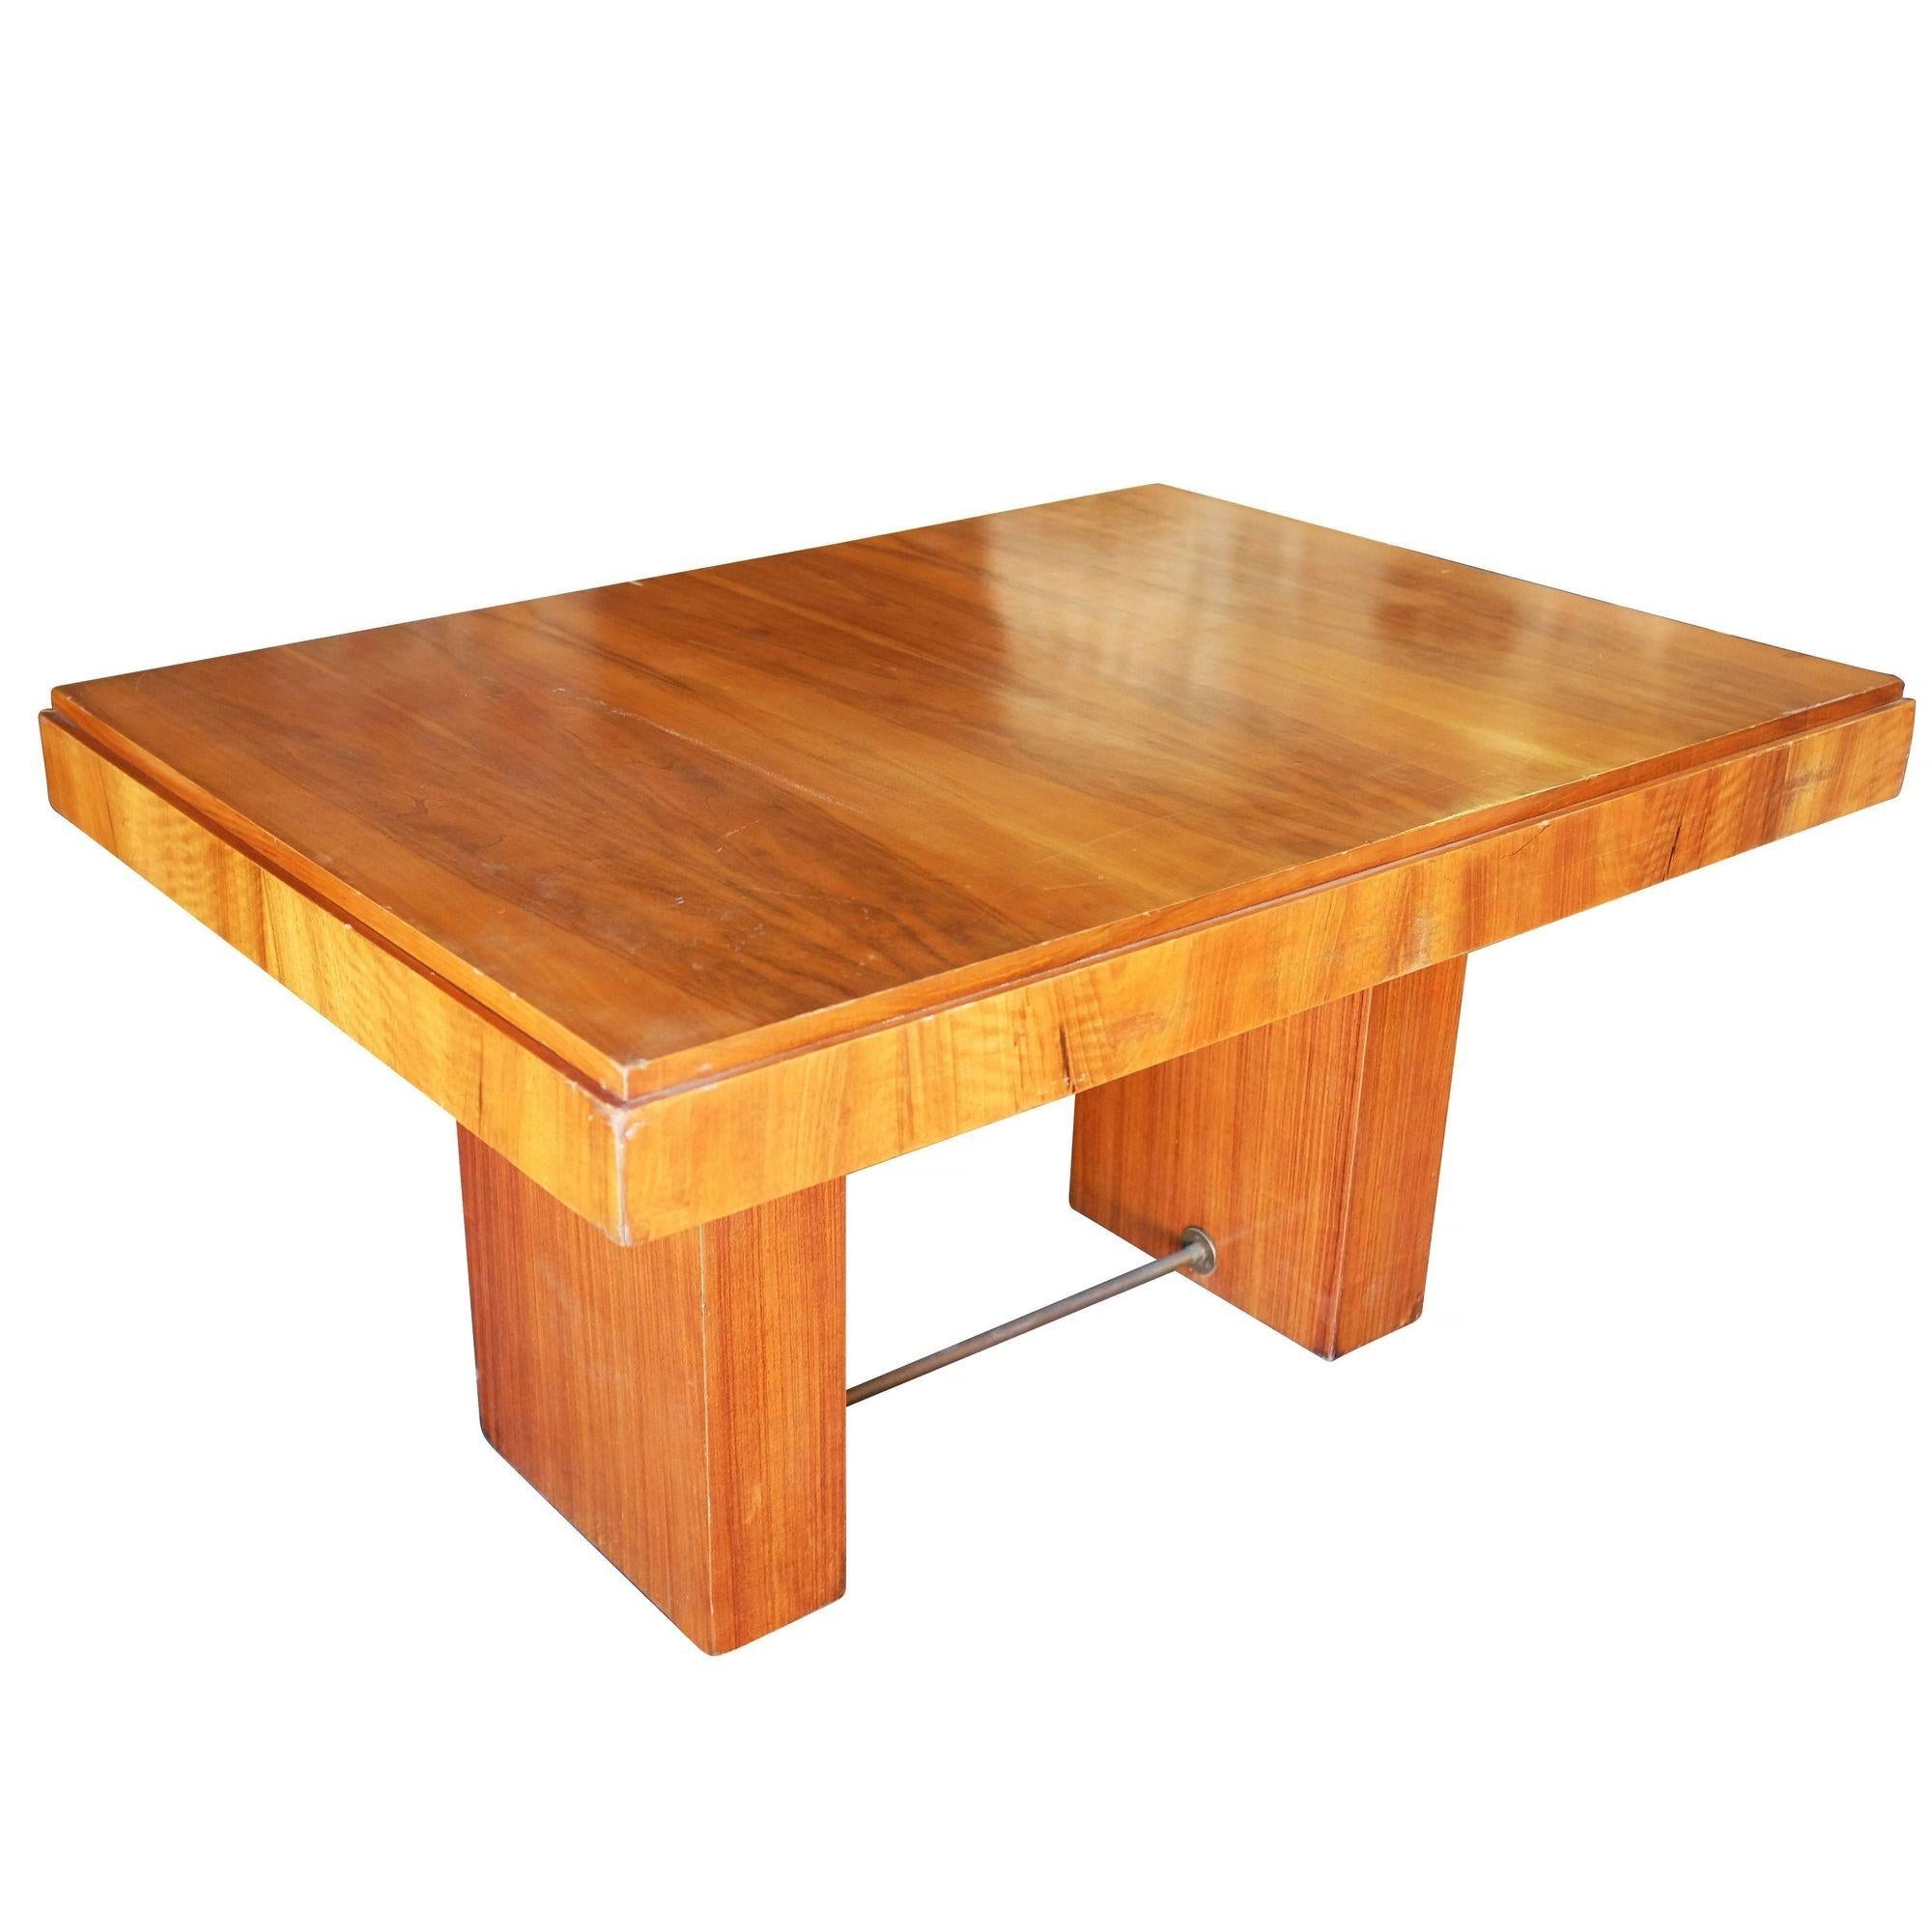 American Charles Dudouyt Cubist Inspired Walnut Desk / Dining Table For Sale